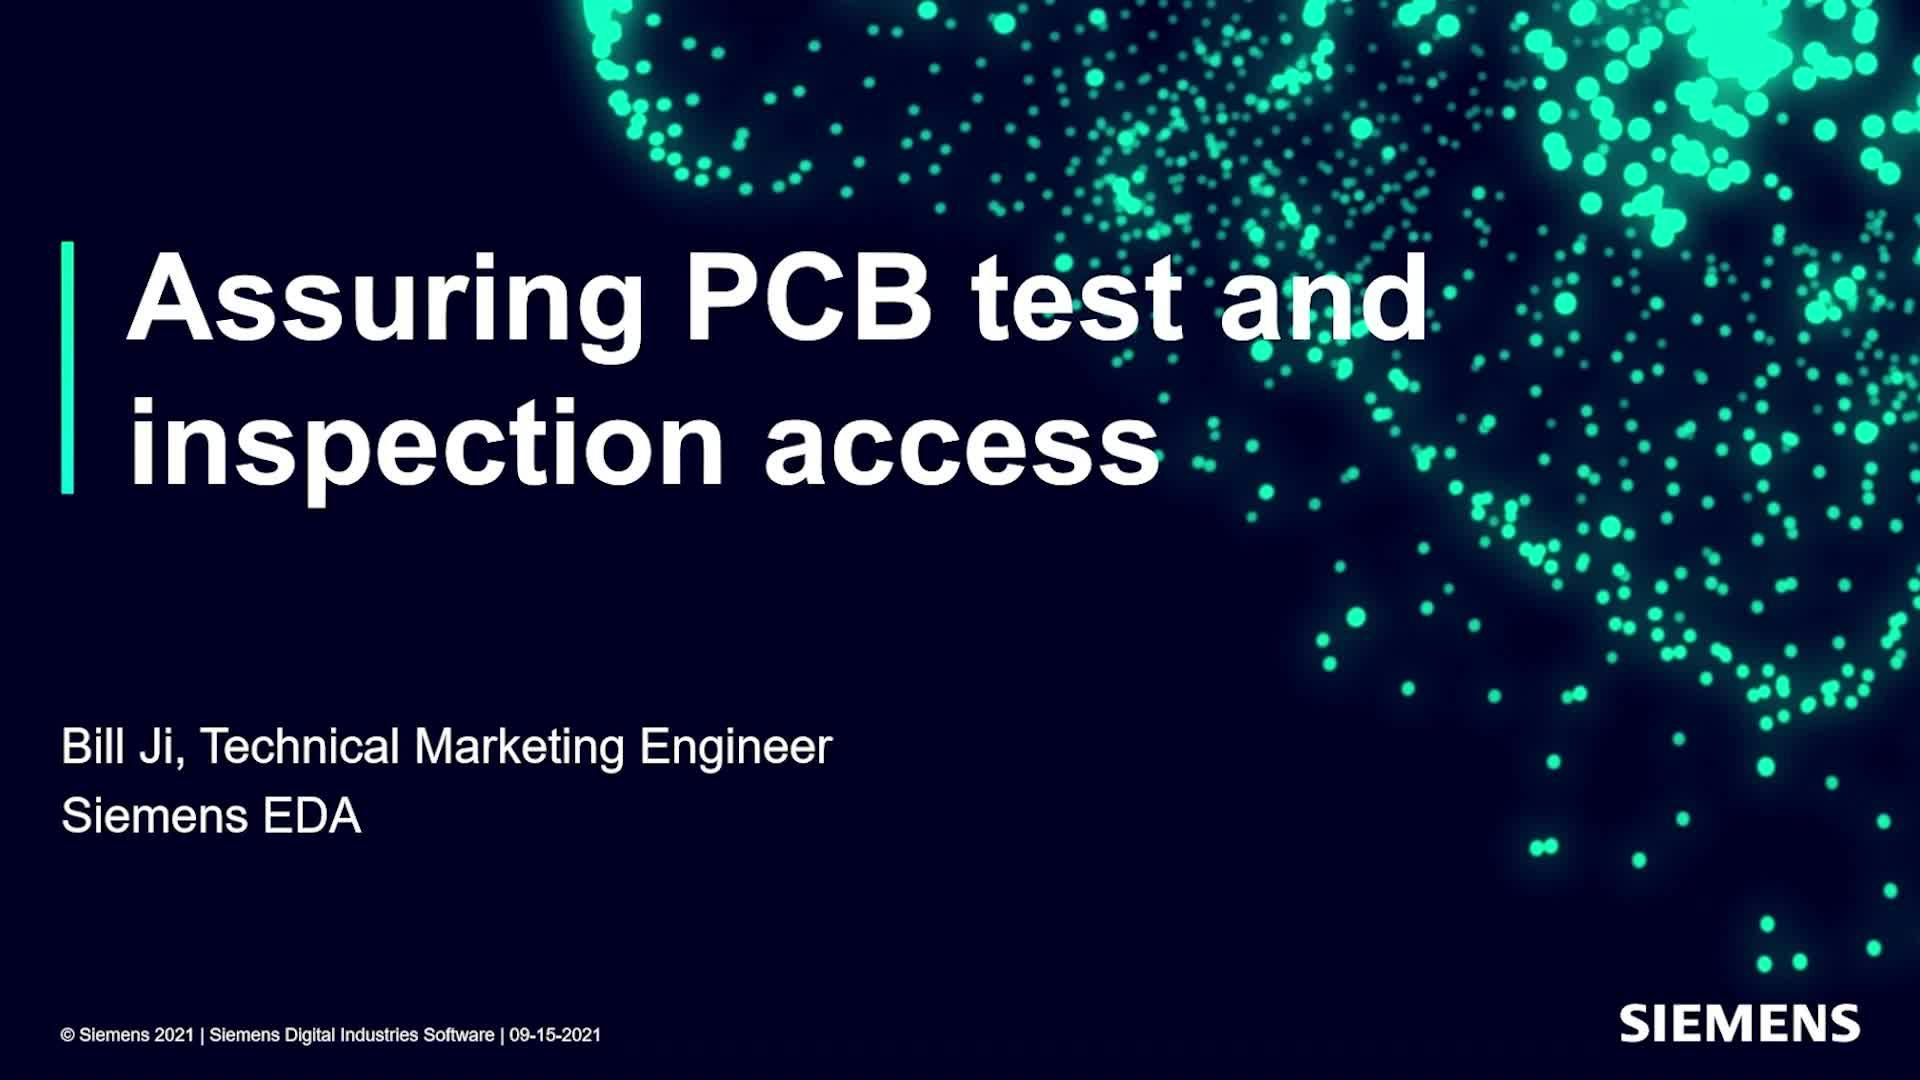 Assuring PCB test and inspection access